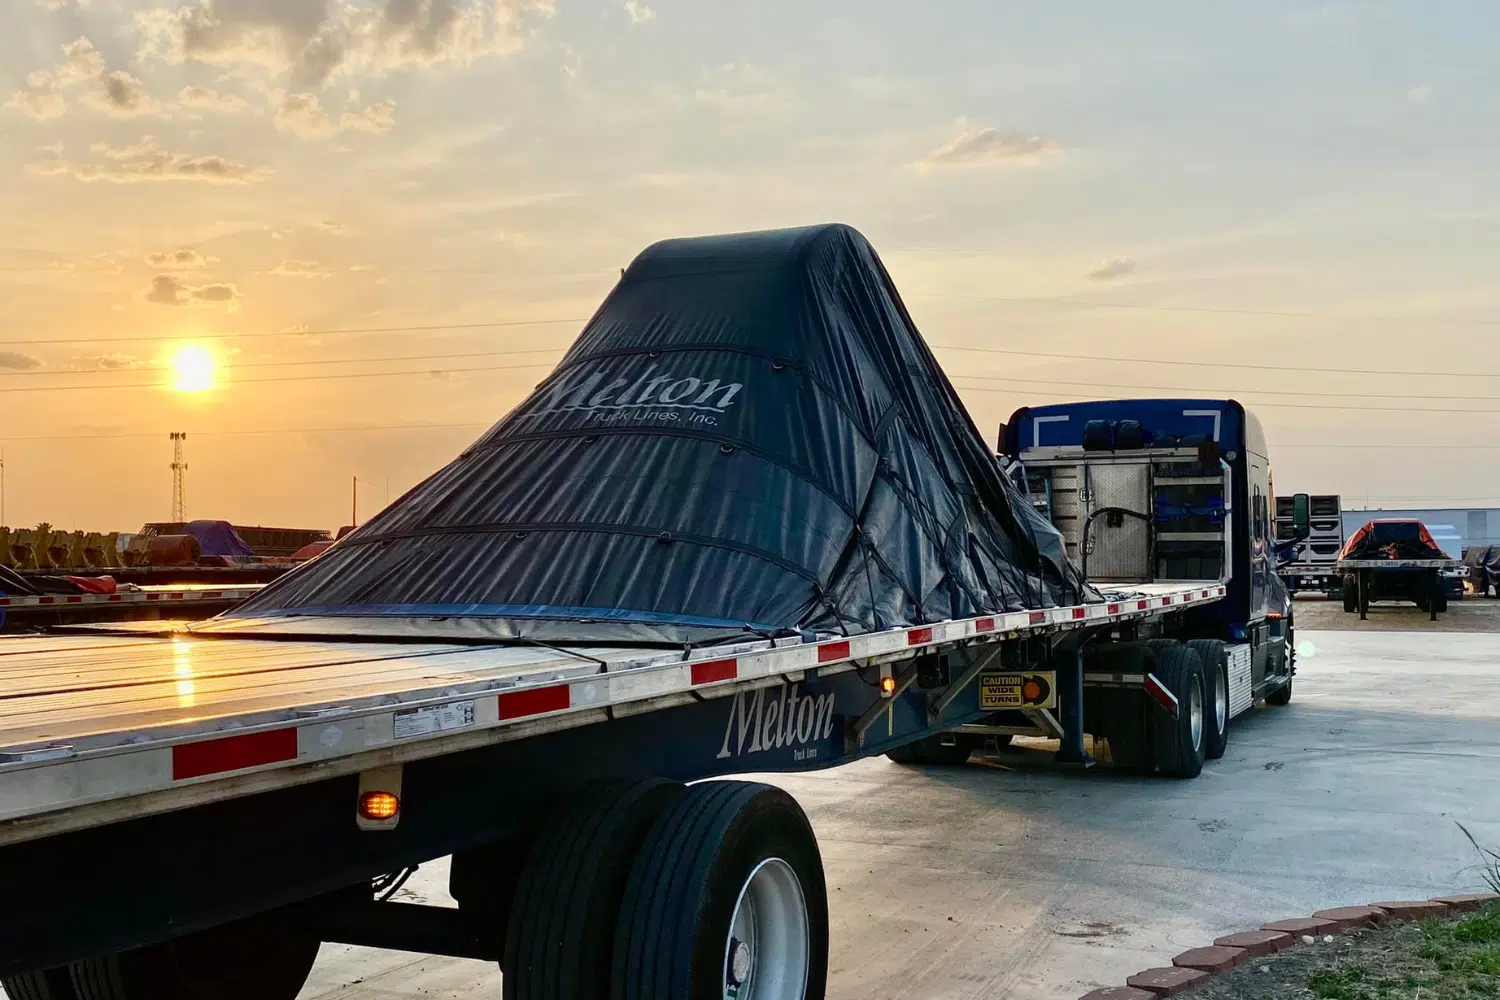 A Melton truck parked in the sunset with a tarp over a load